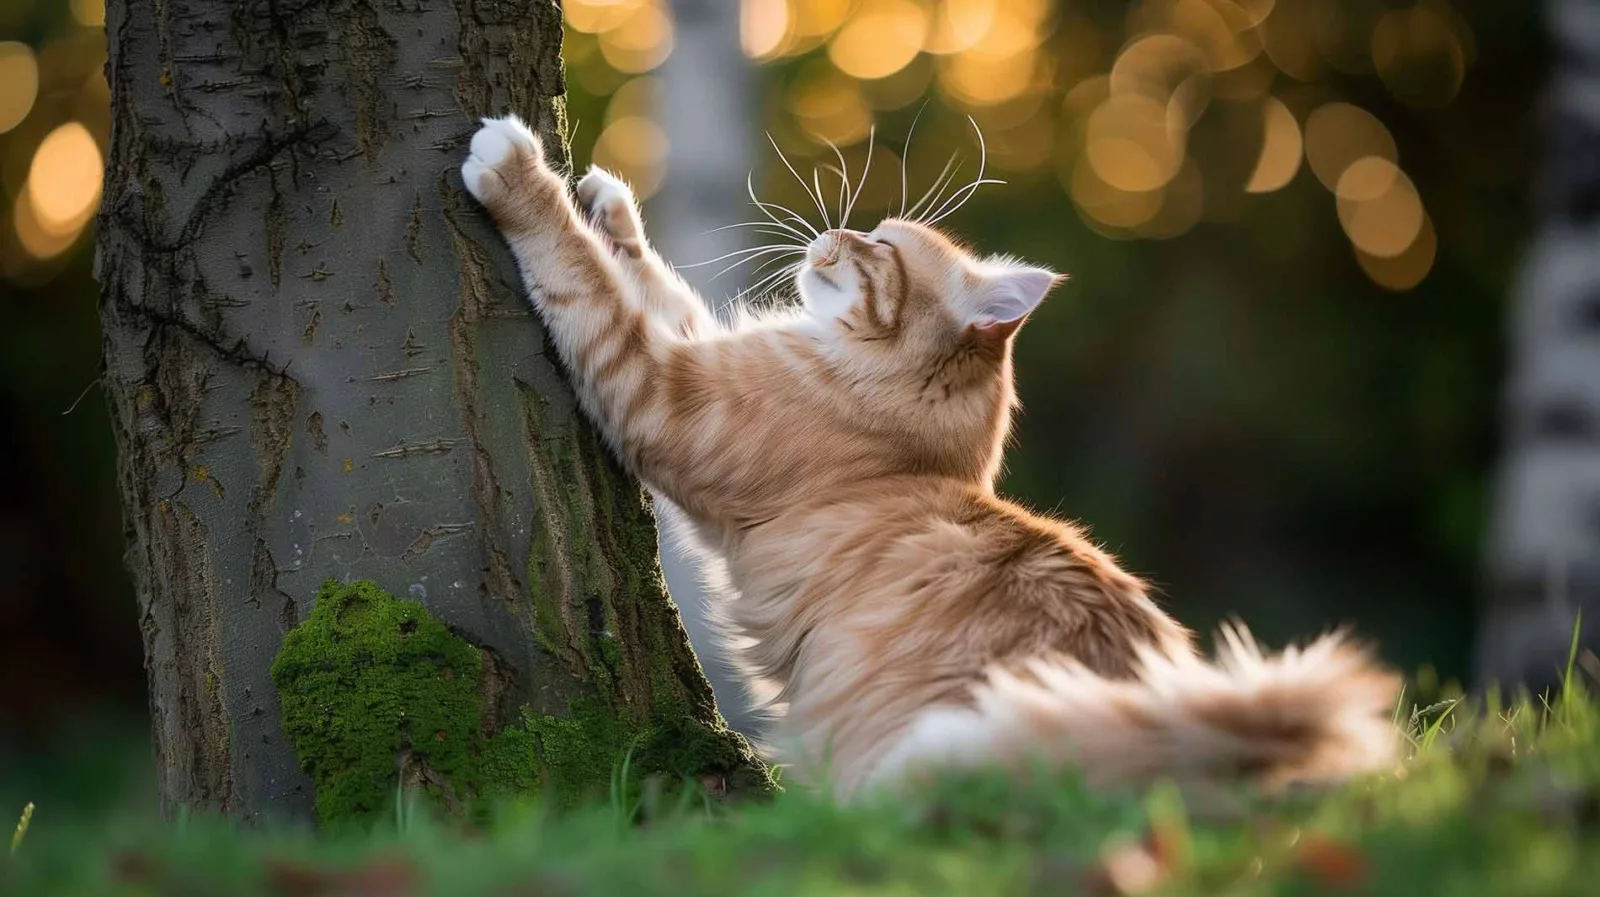 A larger cat is captured in a relaxed stretch against the surface of a tree. It's standing on its hind legs, front paws extended high above to press against the tree, head tilted back, and eyes closed. The cat’s fluffy fur and soft lines contrast with the sturdy, unmoving tree.